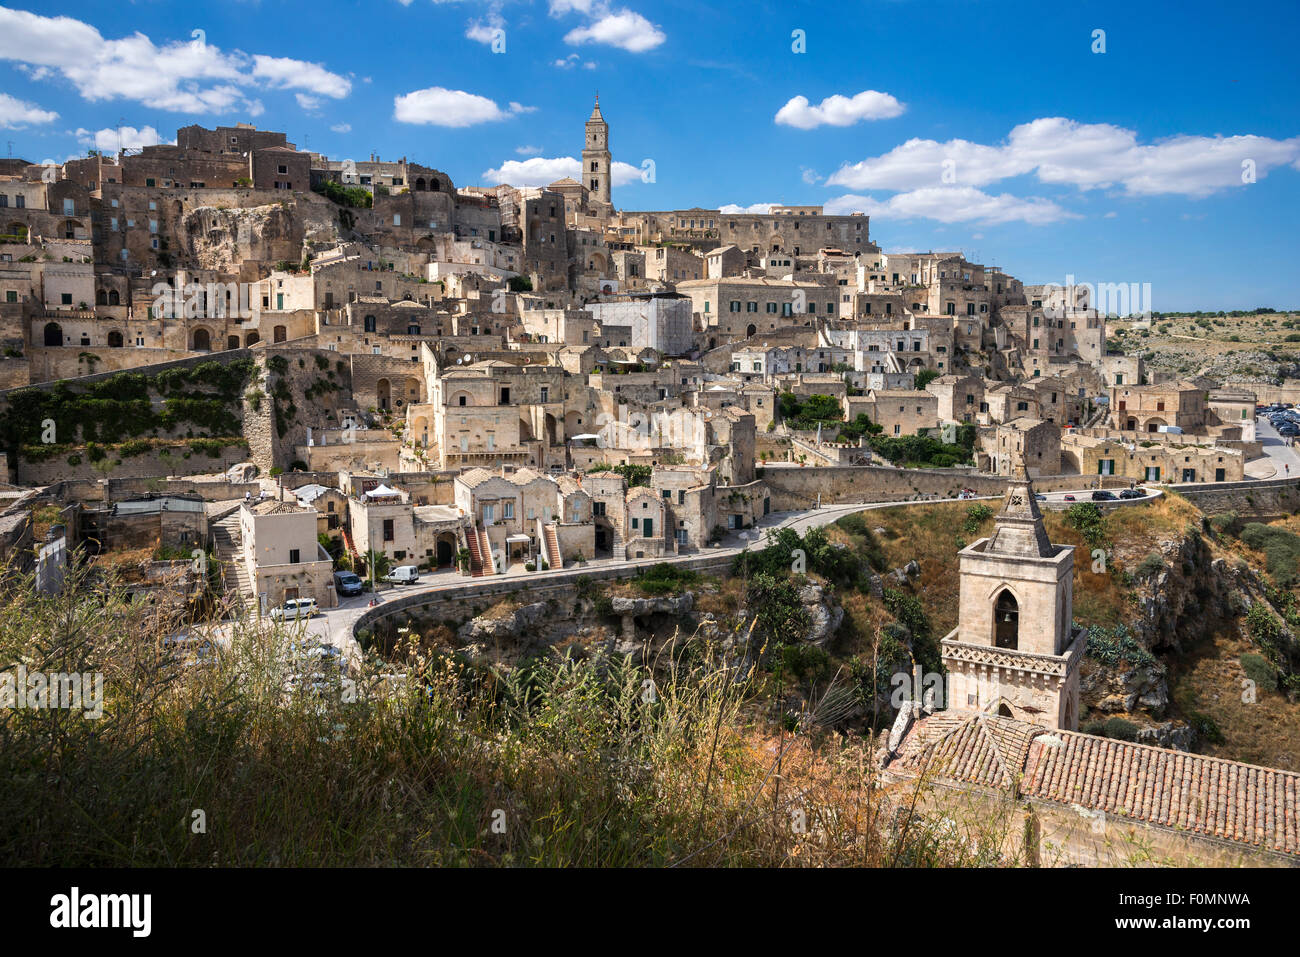 Looking over the town of Matera to the Duomo with San Pietro Caveoso in the forground, Basilicata, Southern Italy Stock Photo